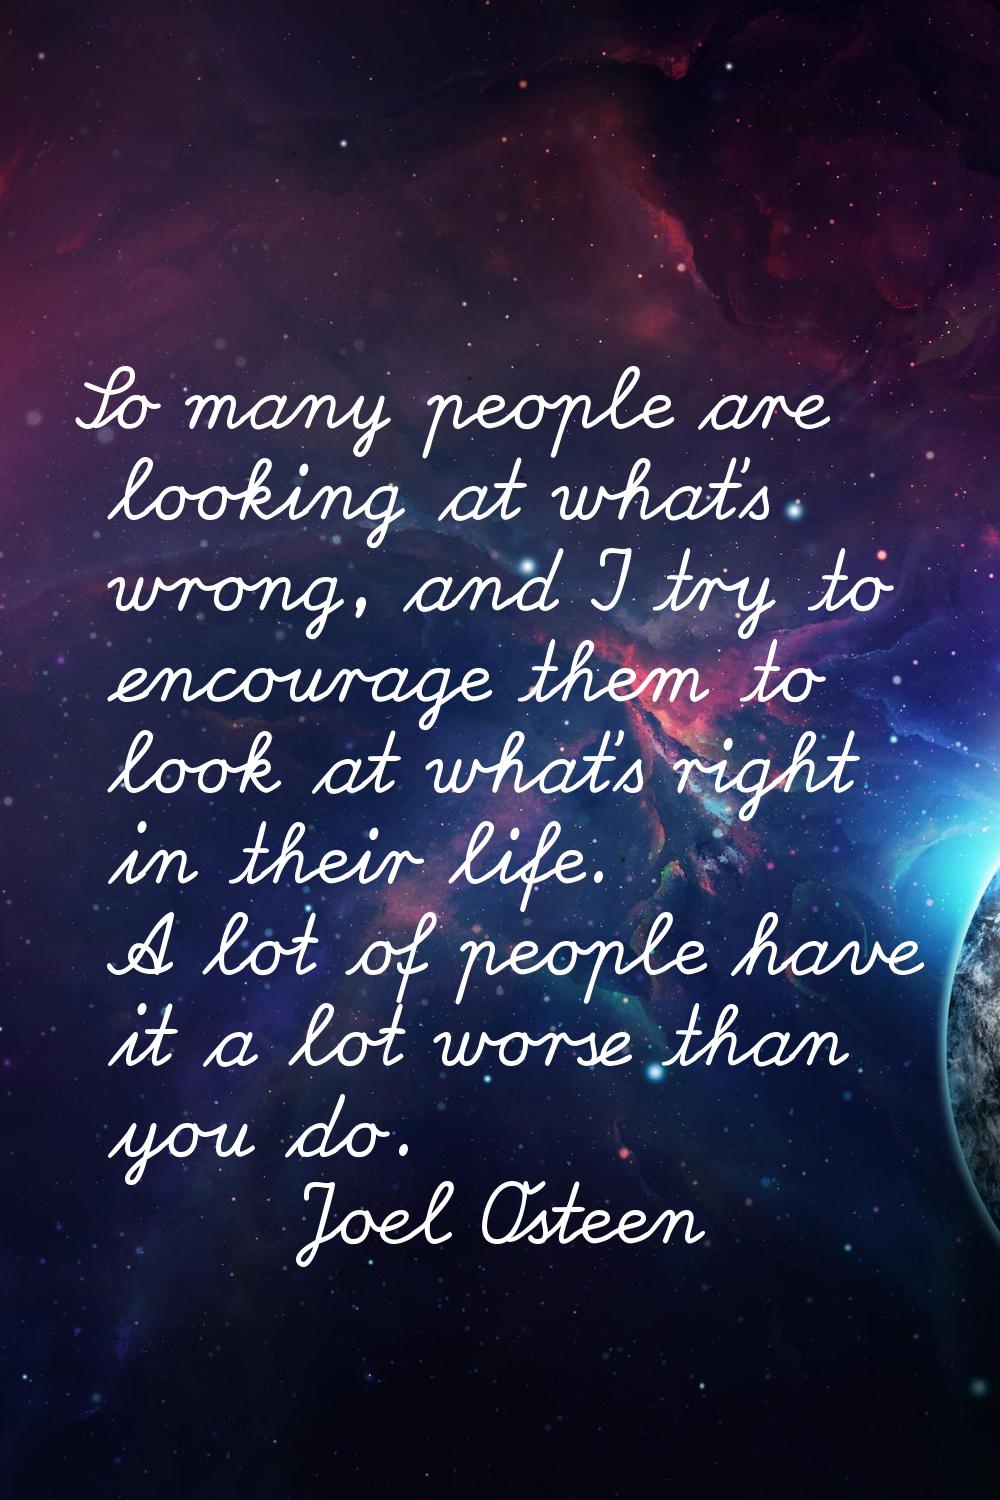 So many people are looking at what's wrong, and I try to encourage them to look at what's right in 